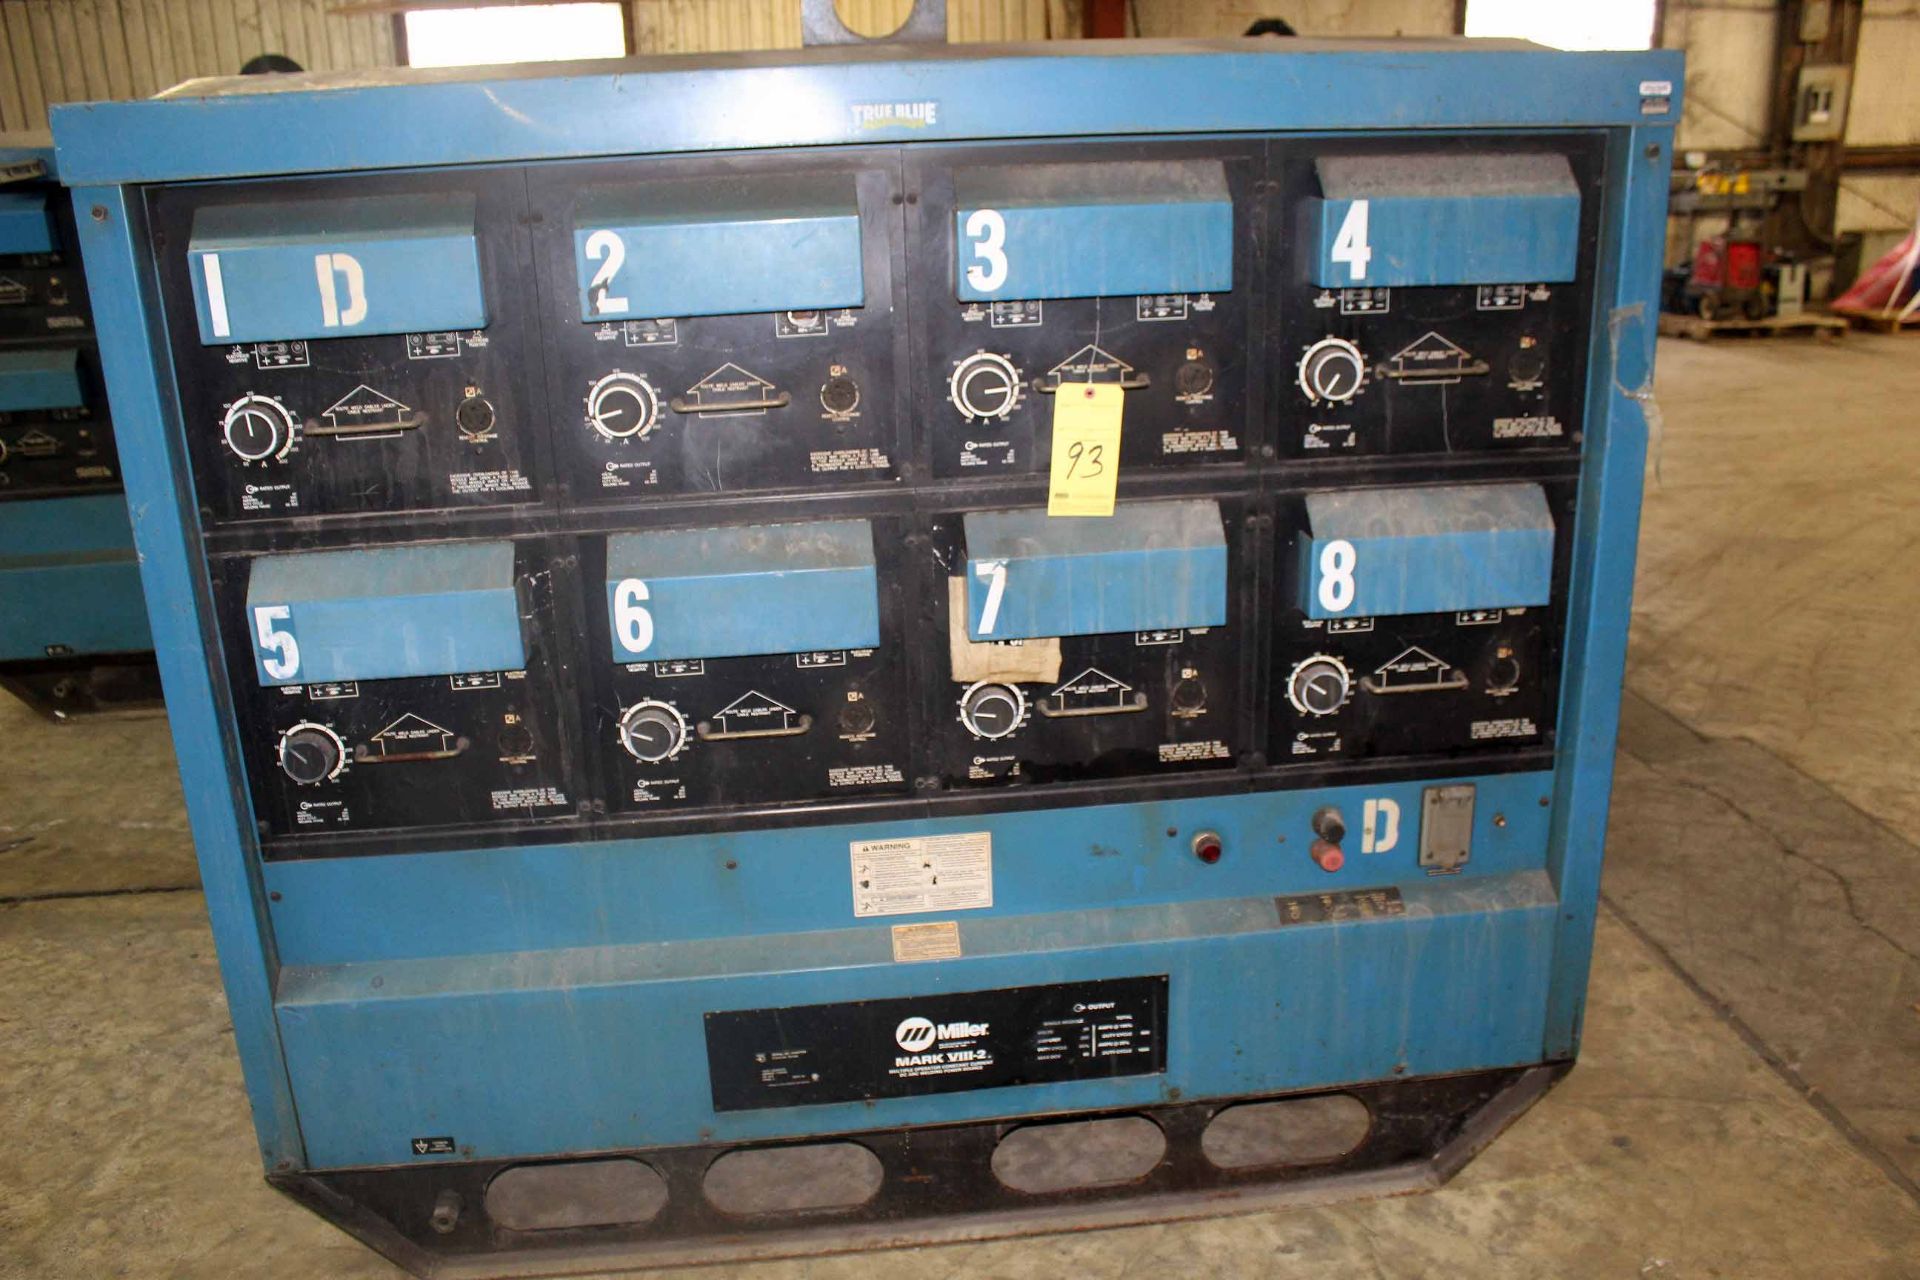 ARC WELDER, MILLER MULTIPLE OPERATOR CONSTANT CURRENT DC, 200 amps @ 40 v., 1,600 duty cycle, S/N